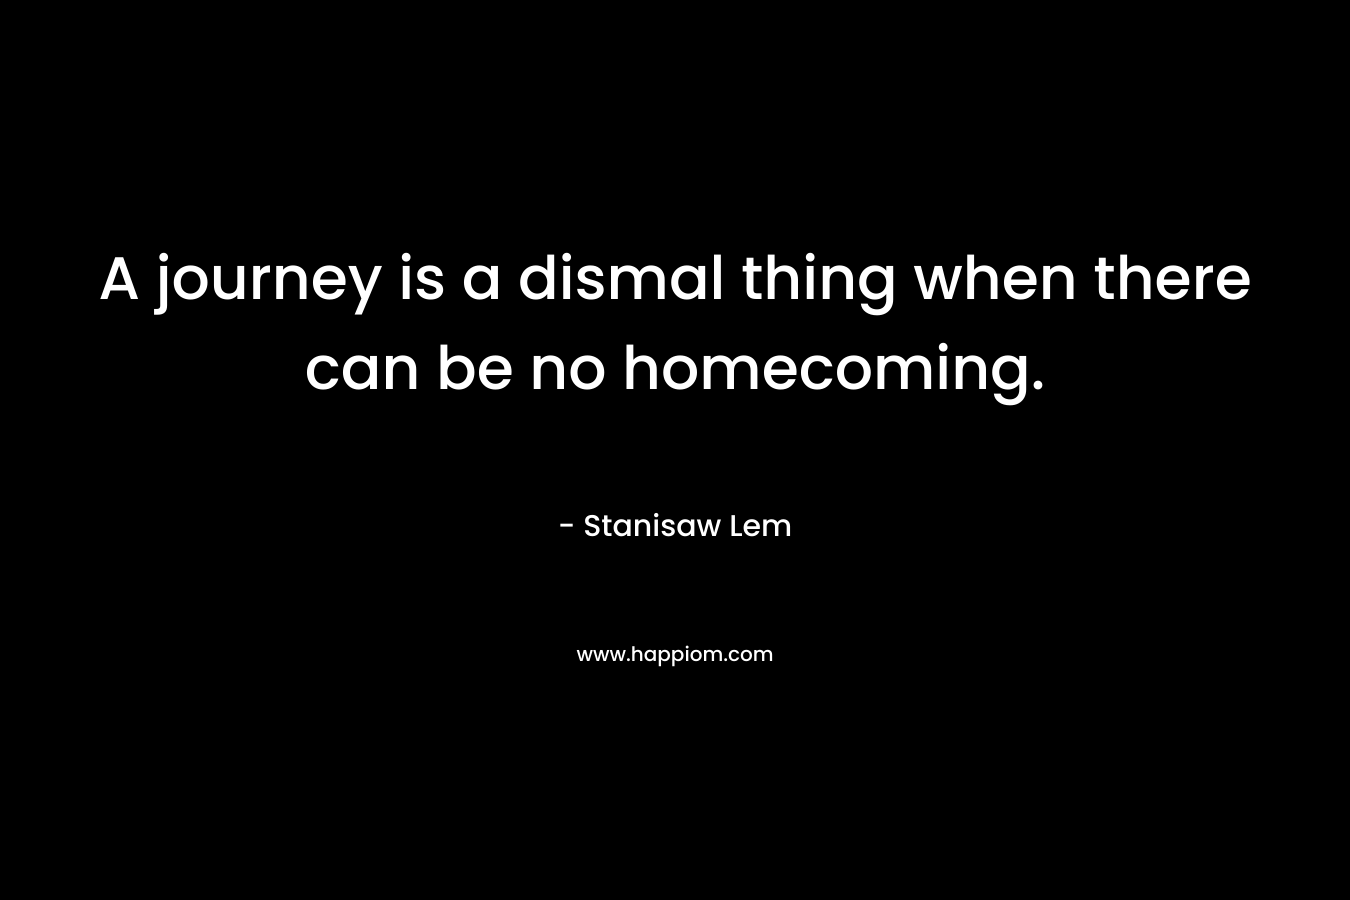 A journey is a dismal thing when there can be no homecoming. – Stanisaw Lem